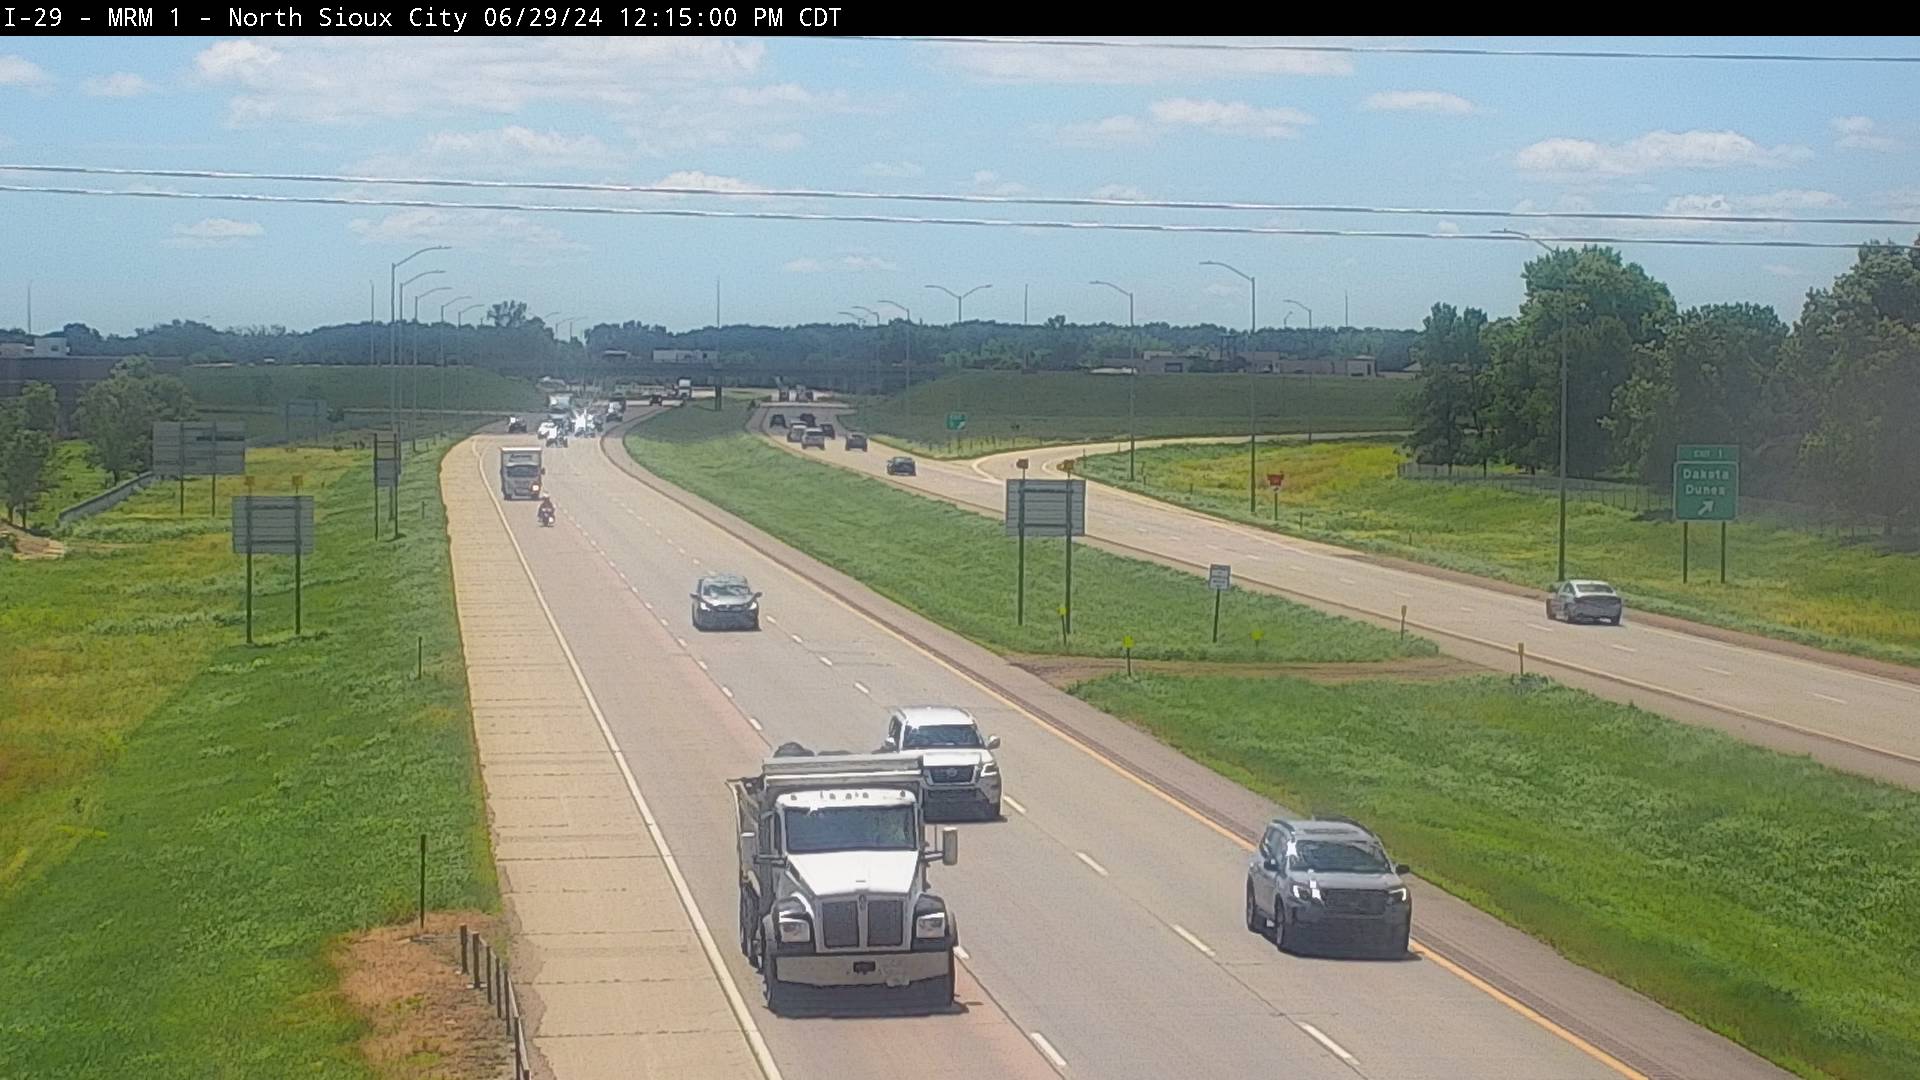 2 miles north of town along I-29 @ MP 2 - South Traffic Camera